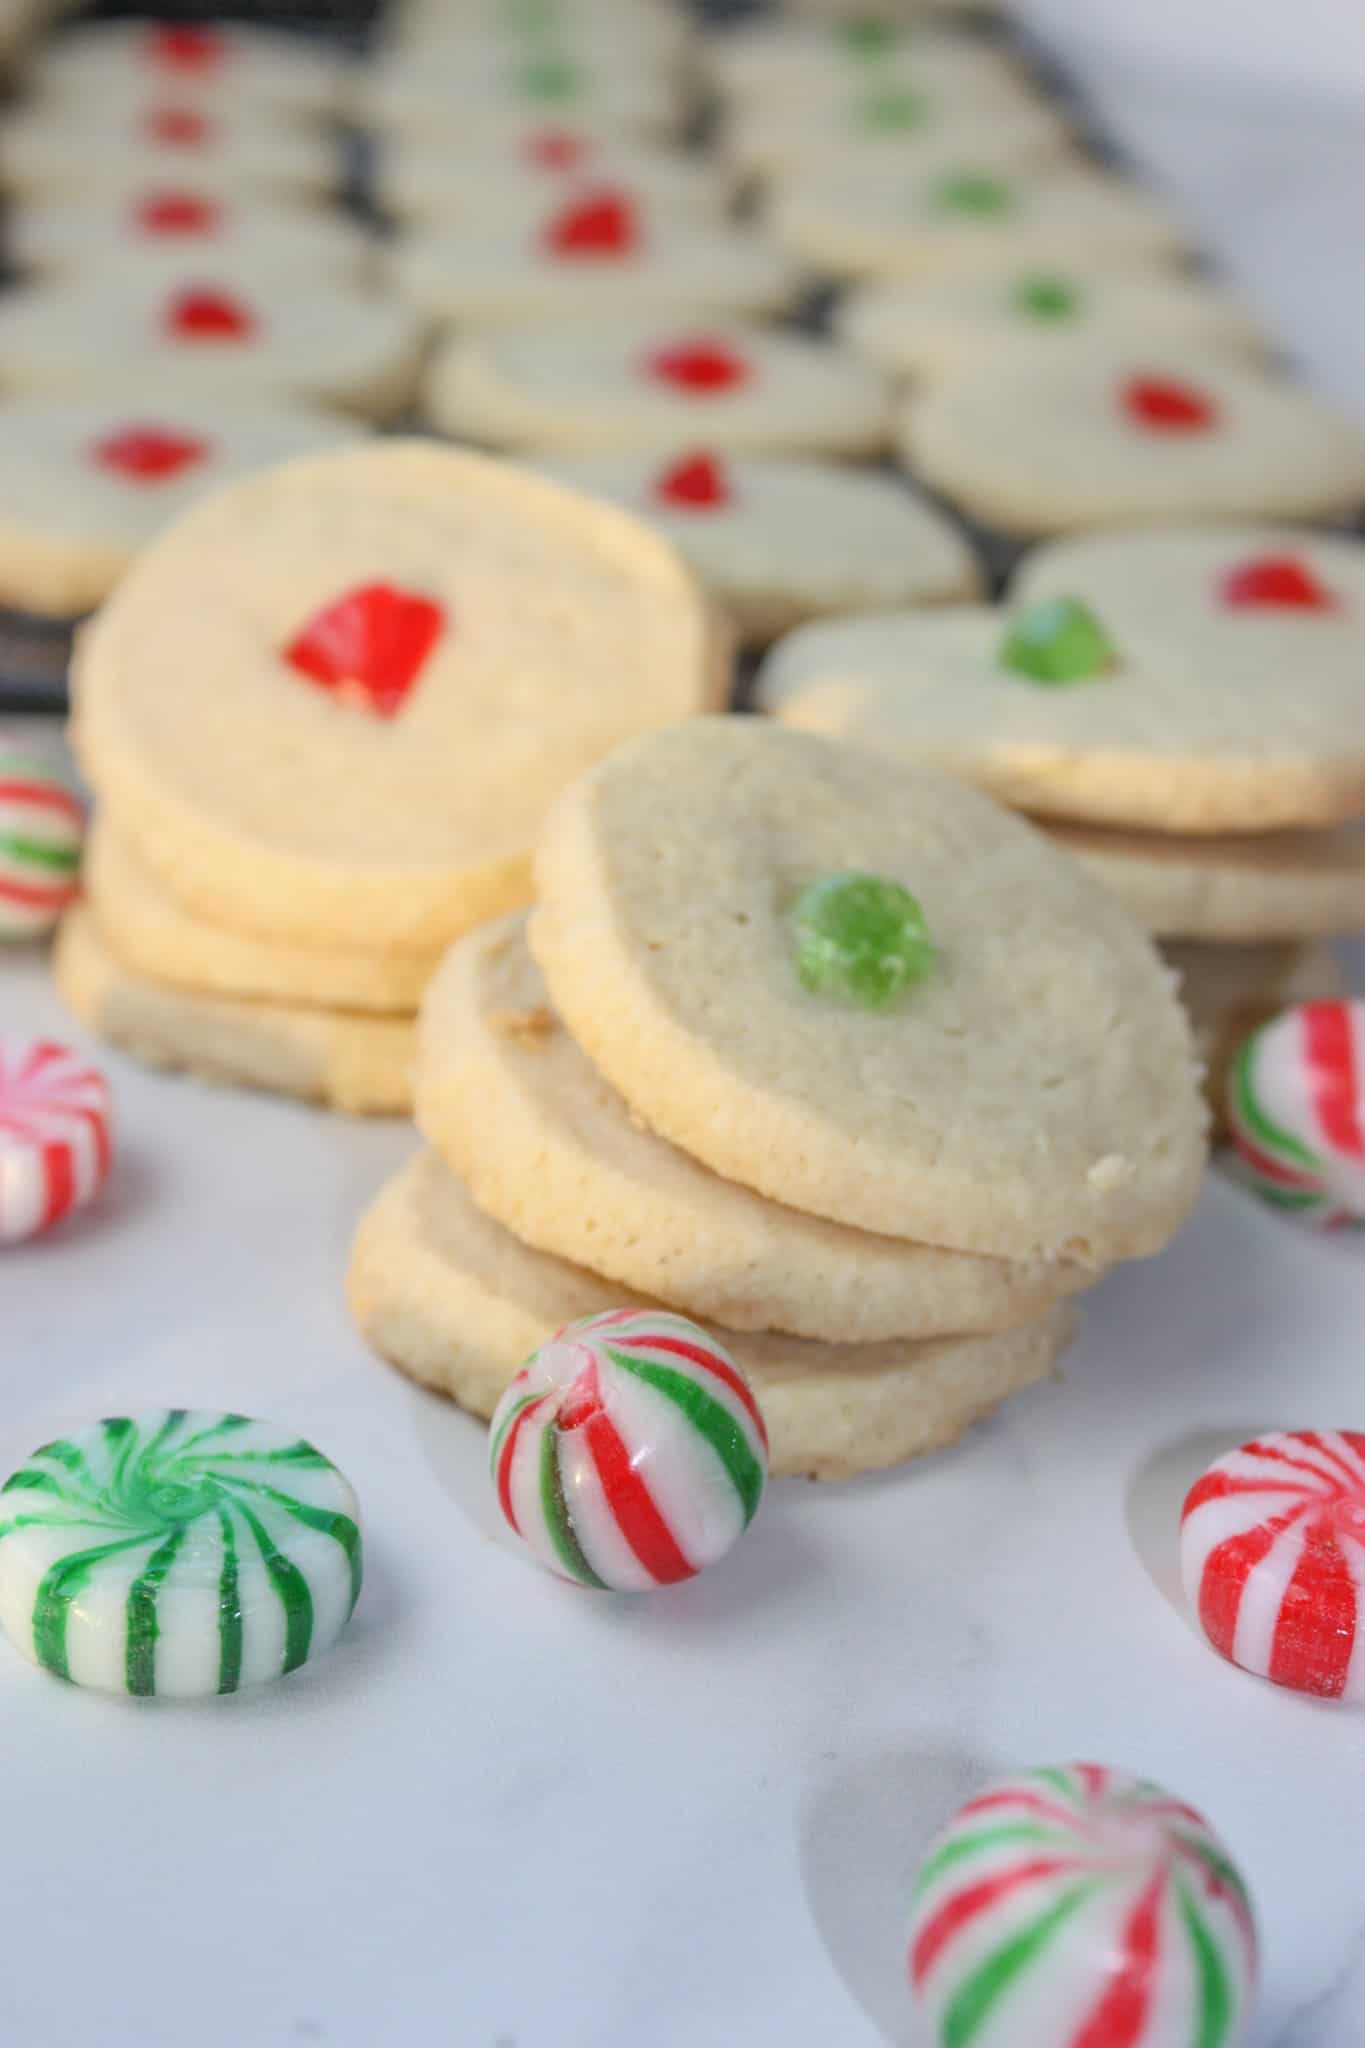 These are the traditional Shortbread Cookies that I grew up with.  Since my Mother passed away ten years ago I have done without this Holiday Tradition.  But thanks to Bob's Red Mill 1 to 1 Gluten Free Baking Flour I can enjoy them once again!